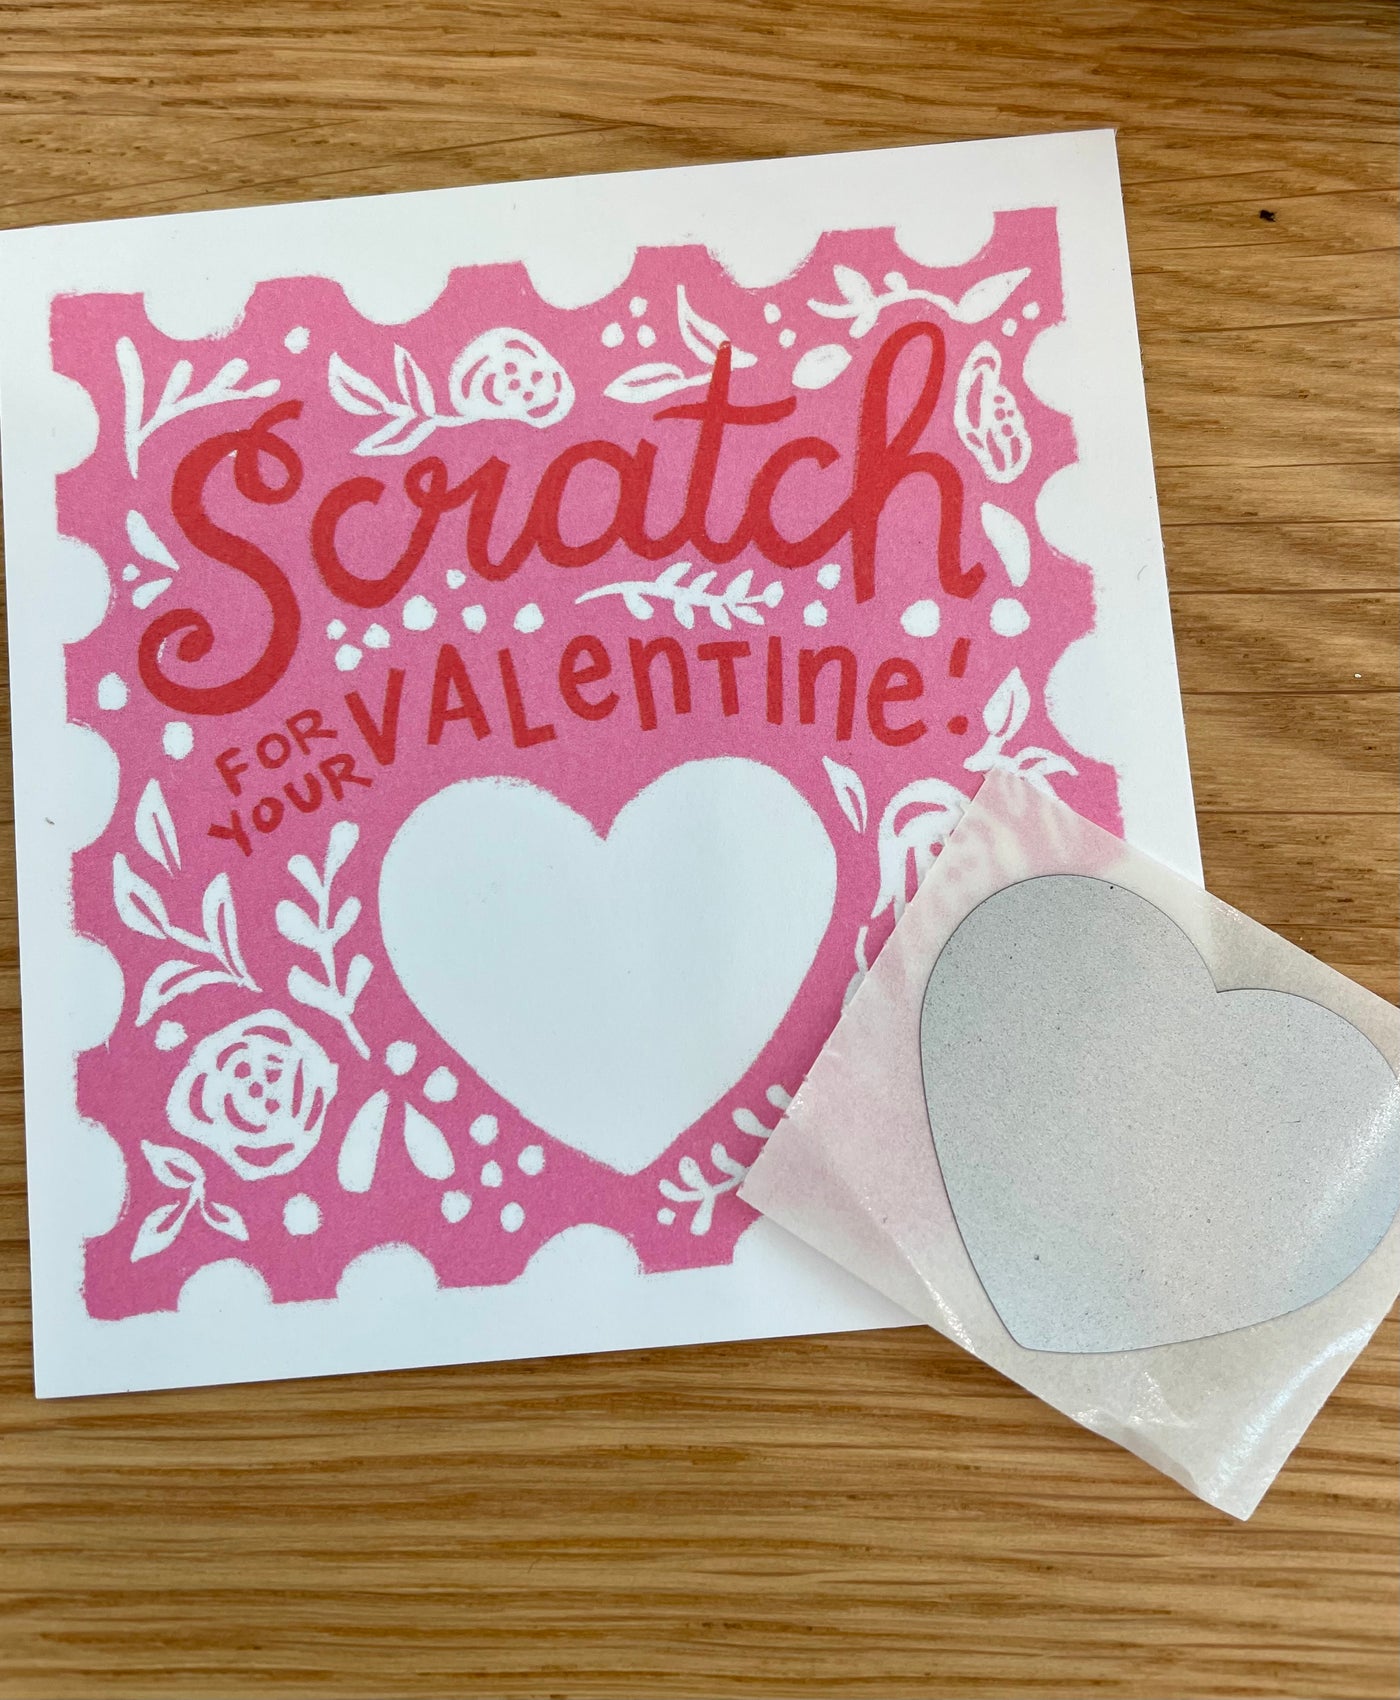 Valentine in pink, red, and white. Scratch for your valentine. Scratch off valentines day card.